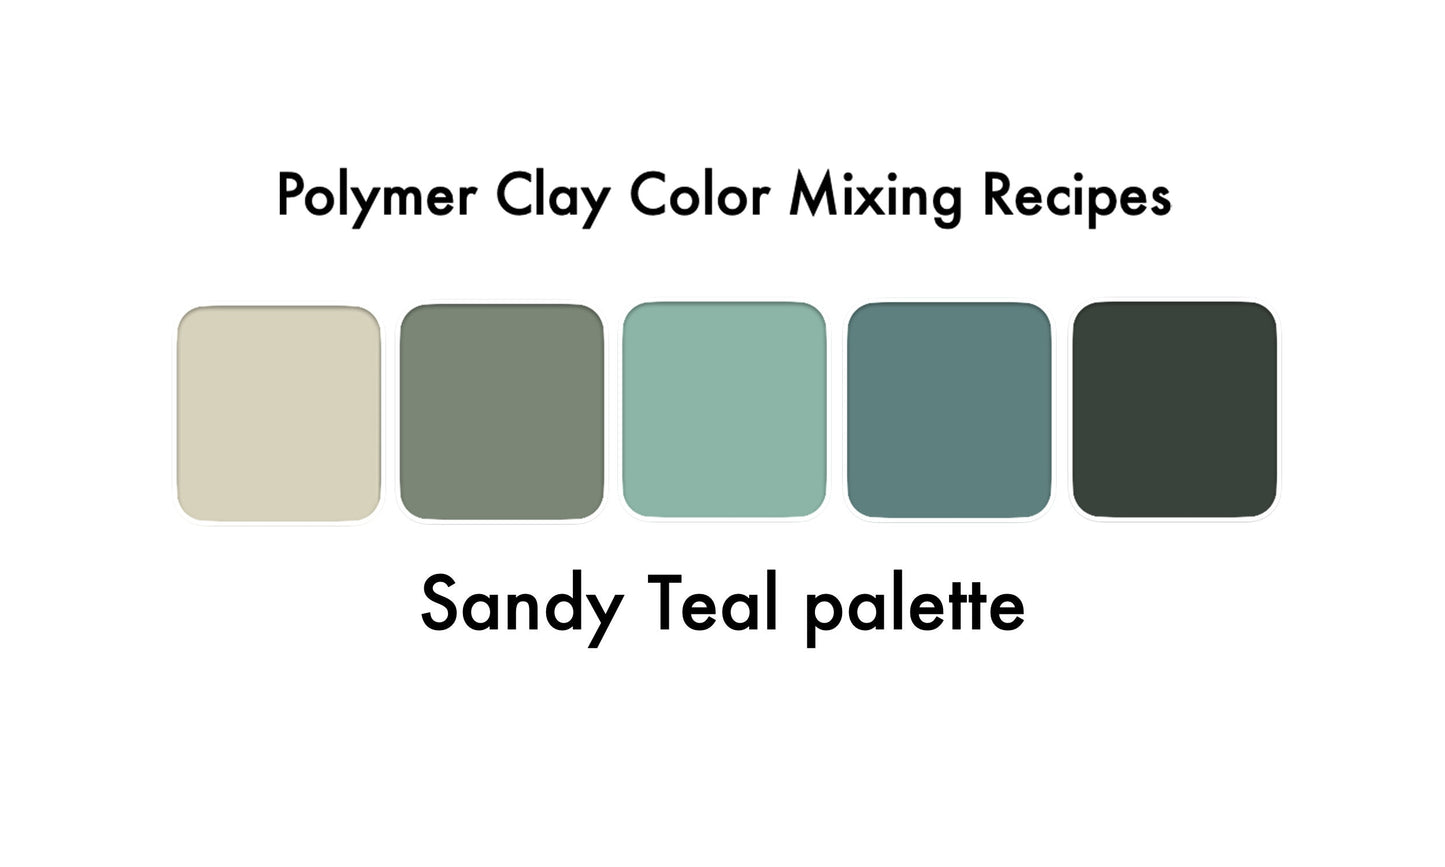 Polymer clay recipes - Sandy Teal